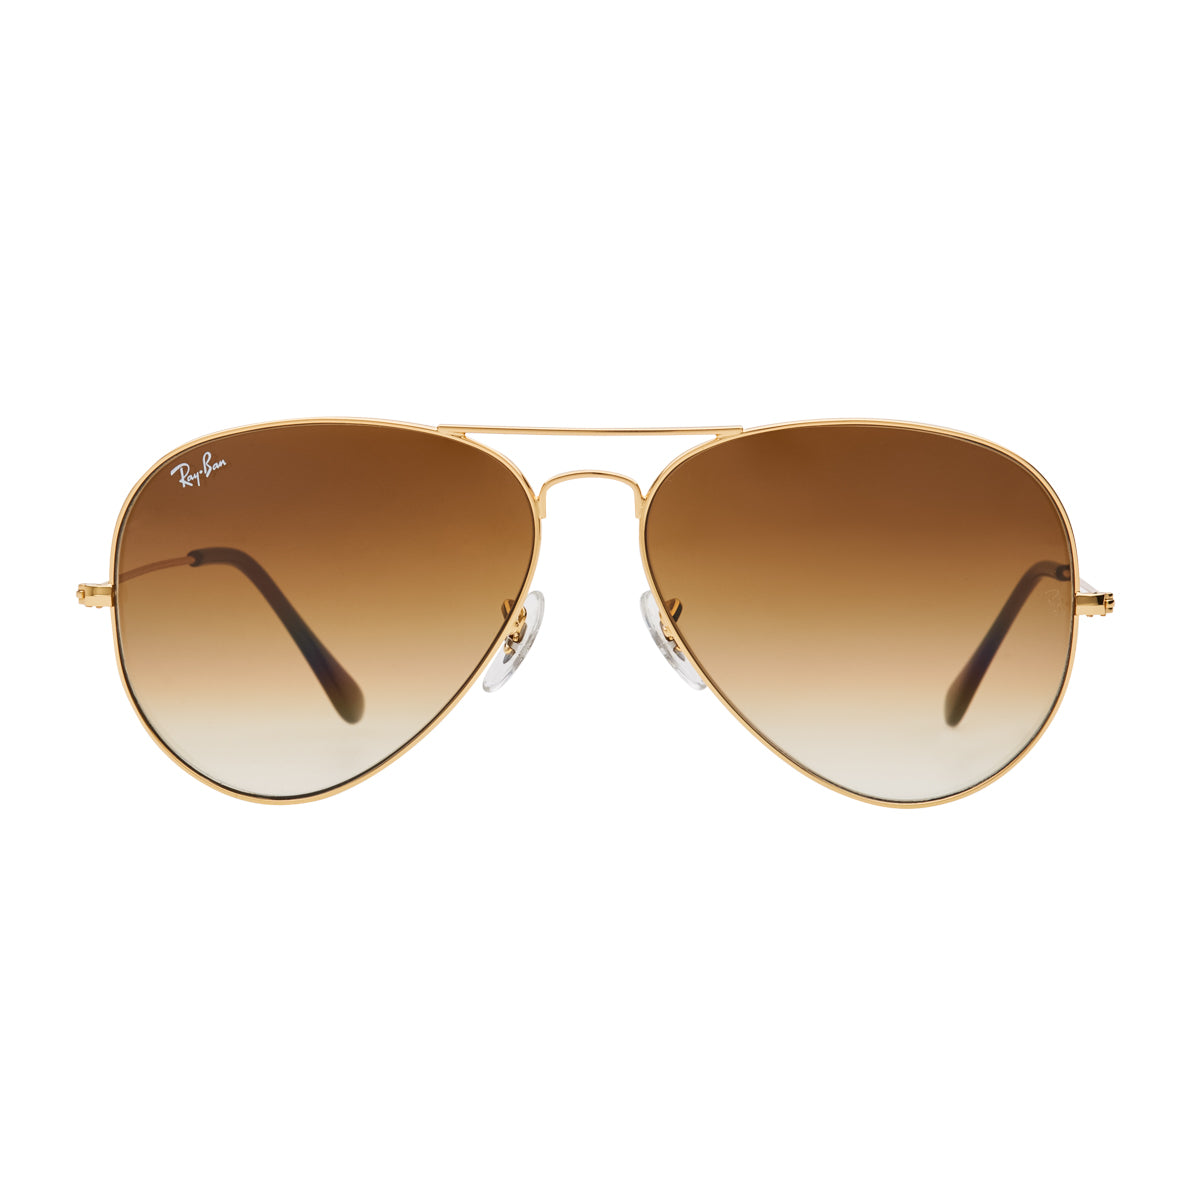 Ray-Ban Aviator Gradient RB3025 Large Sunglasses - Light Brown/Gold ...